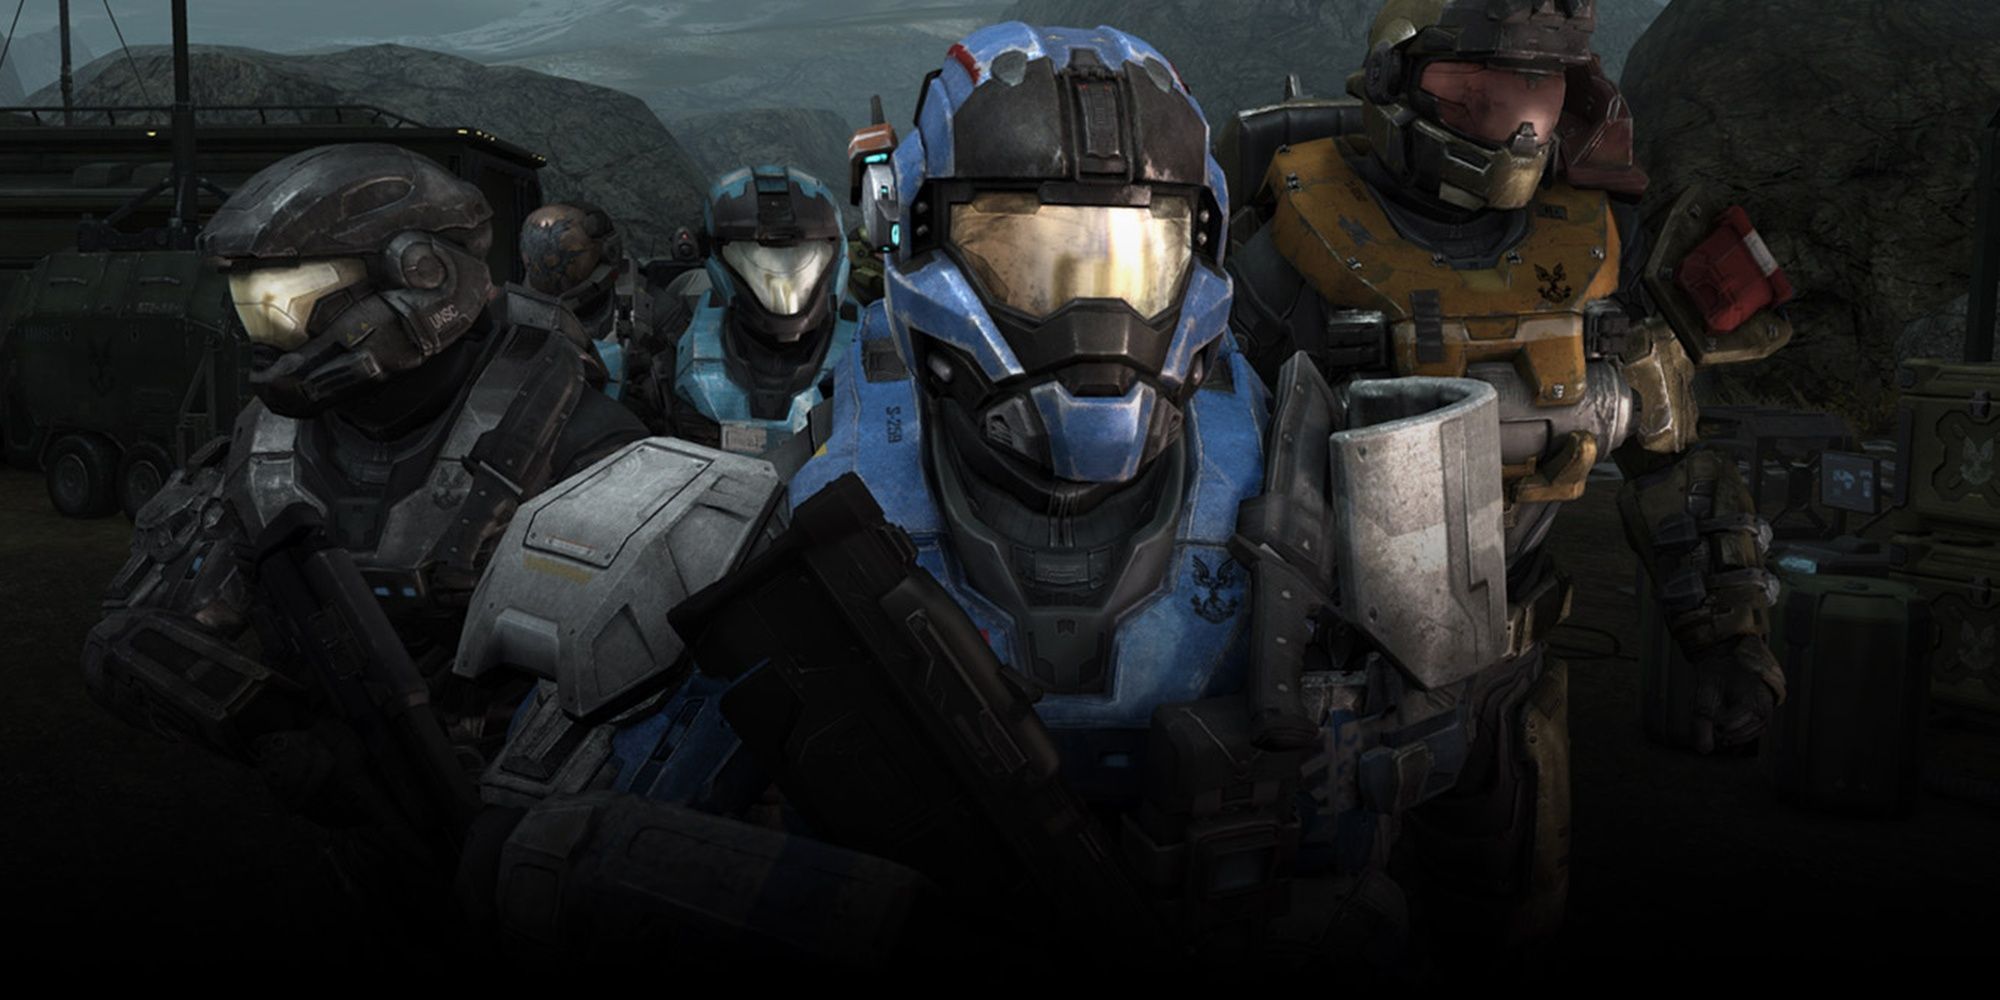 Halo: Every Main Character’s Age, Height, And Birthday